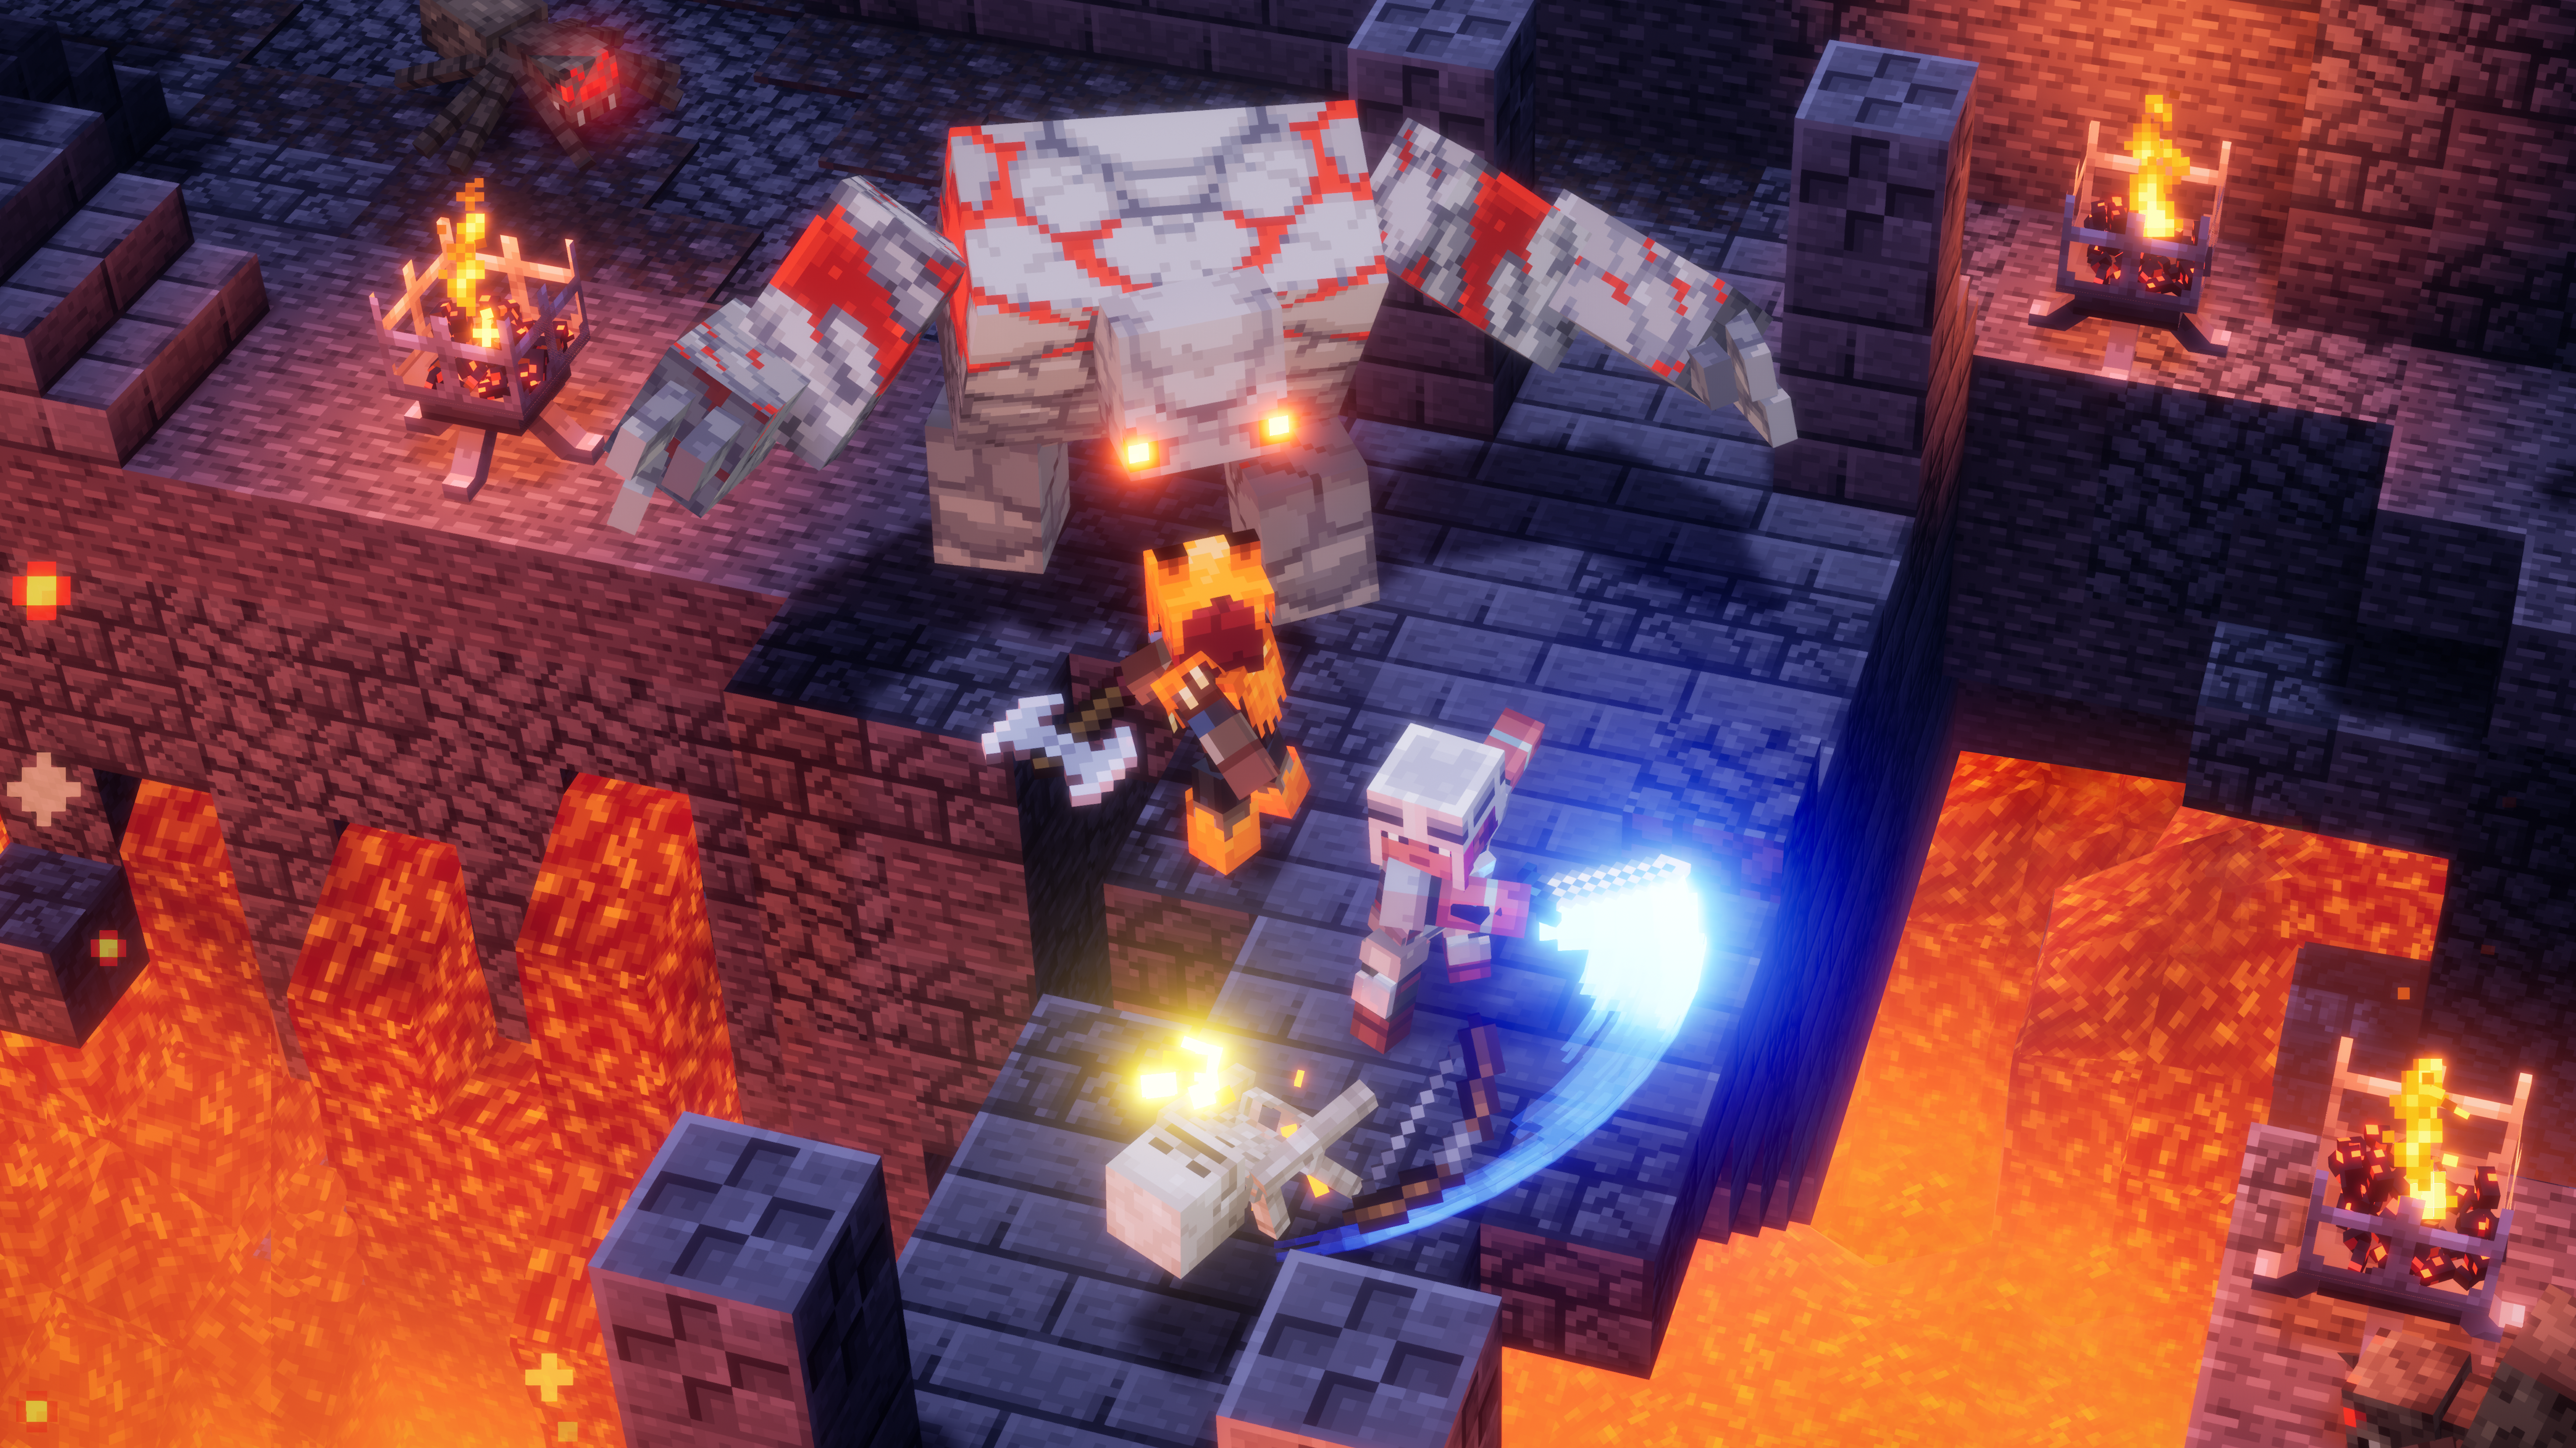 Minecraft Dungeons Is A Fun But Stripped-Down Dungeon Brawler